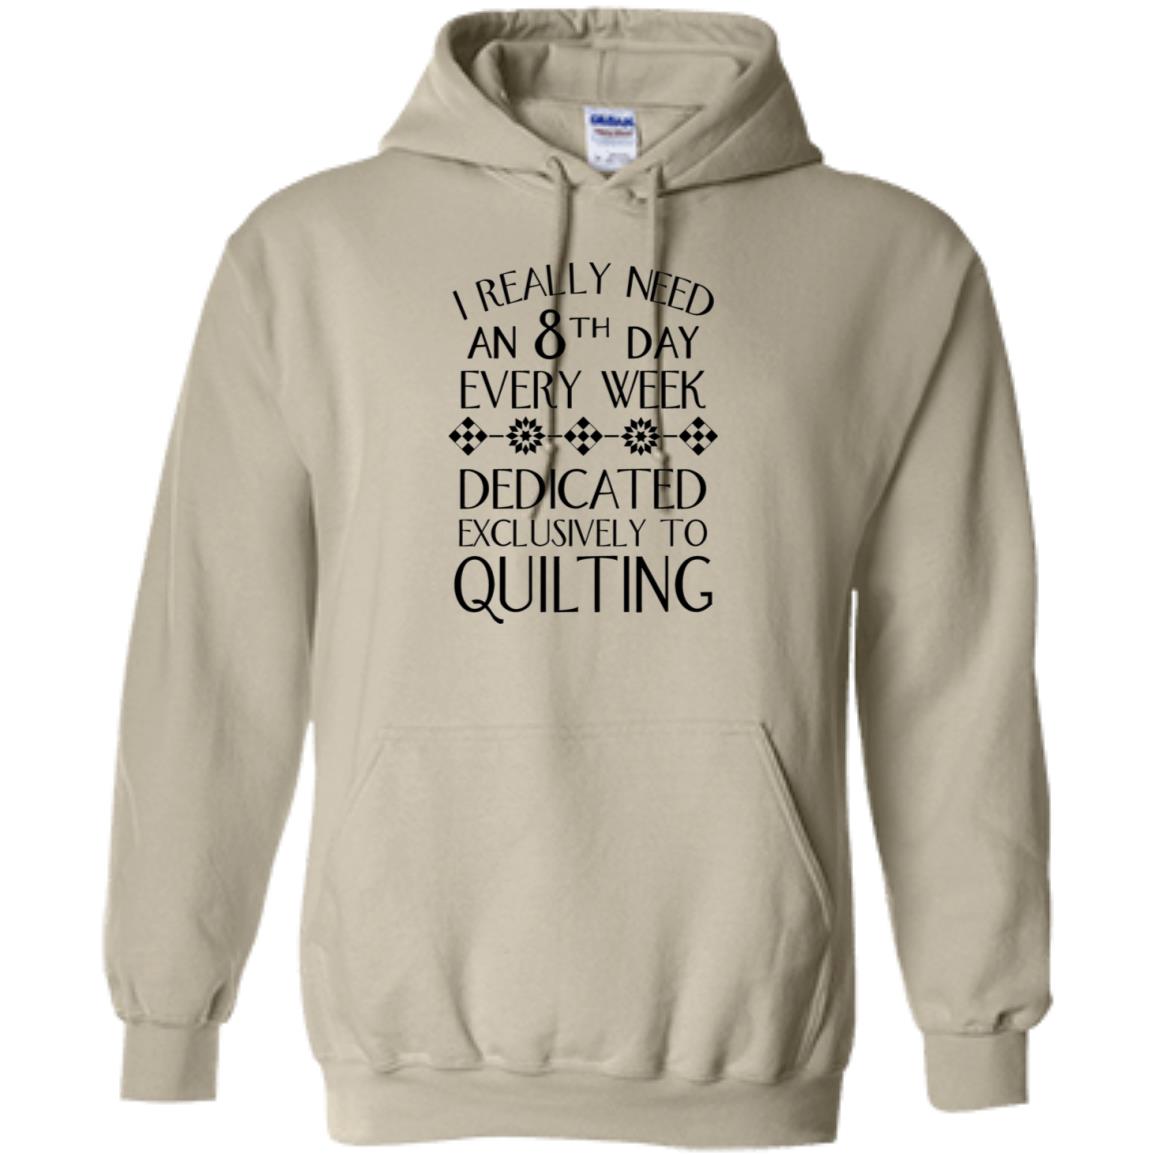 8th Day Quilting Hoodie